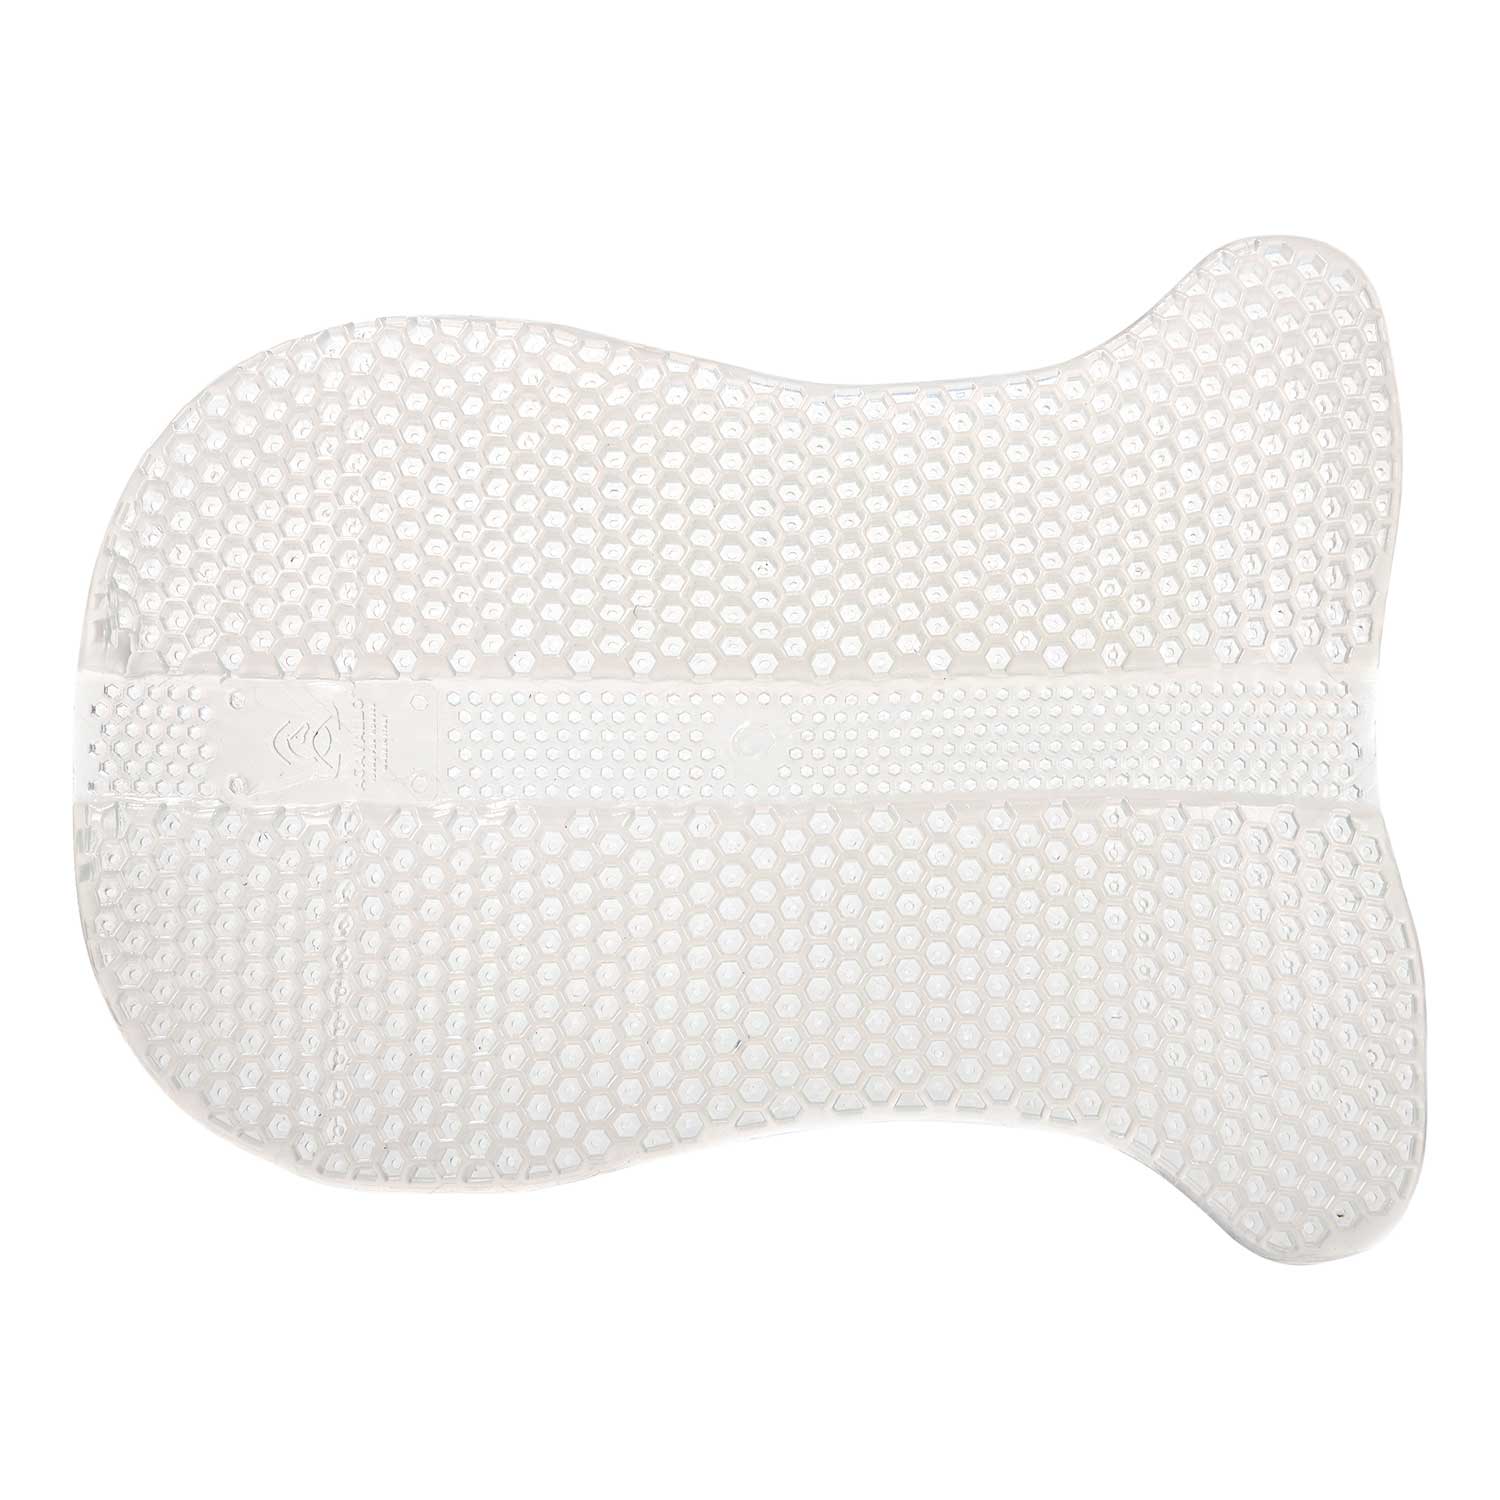 Acavallo flat gel pad with holes